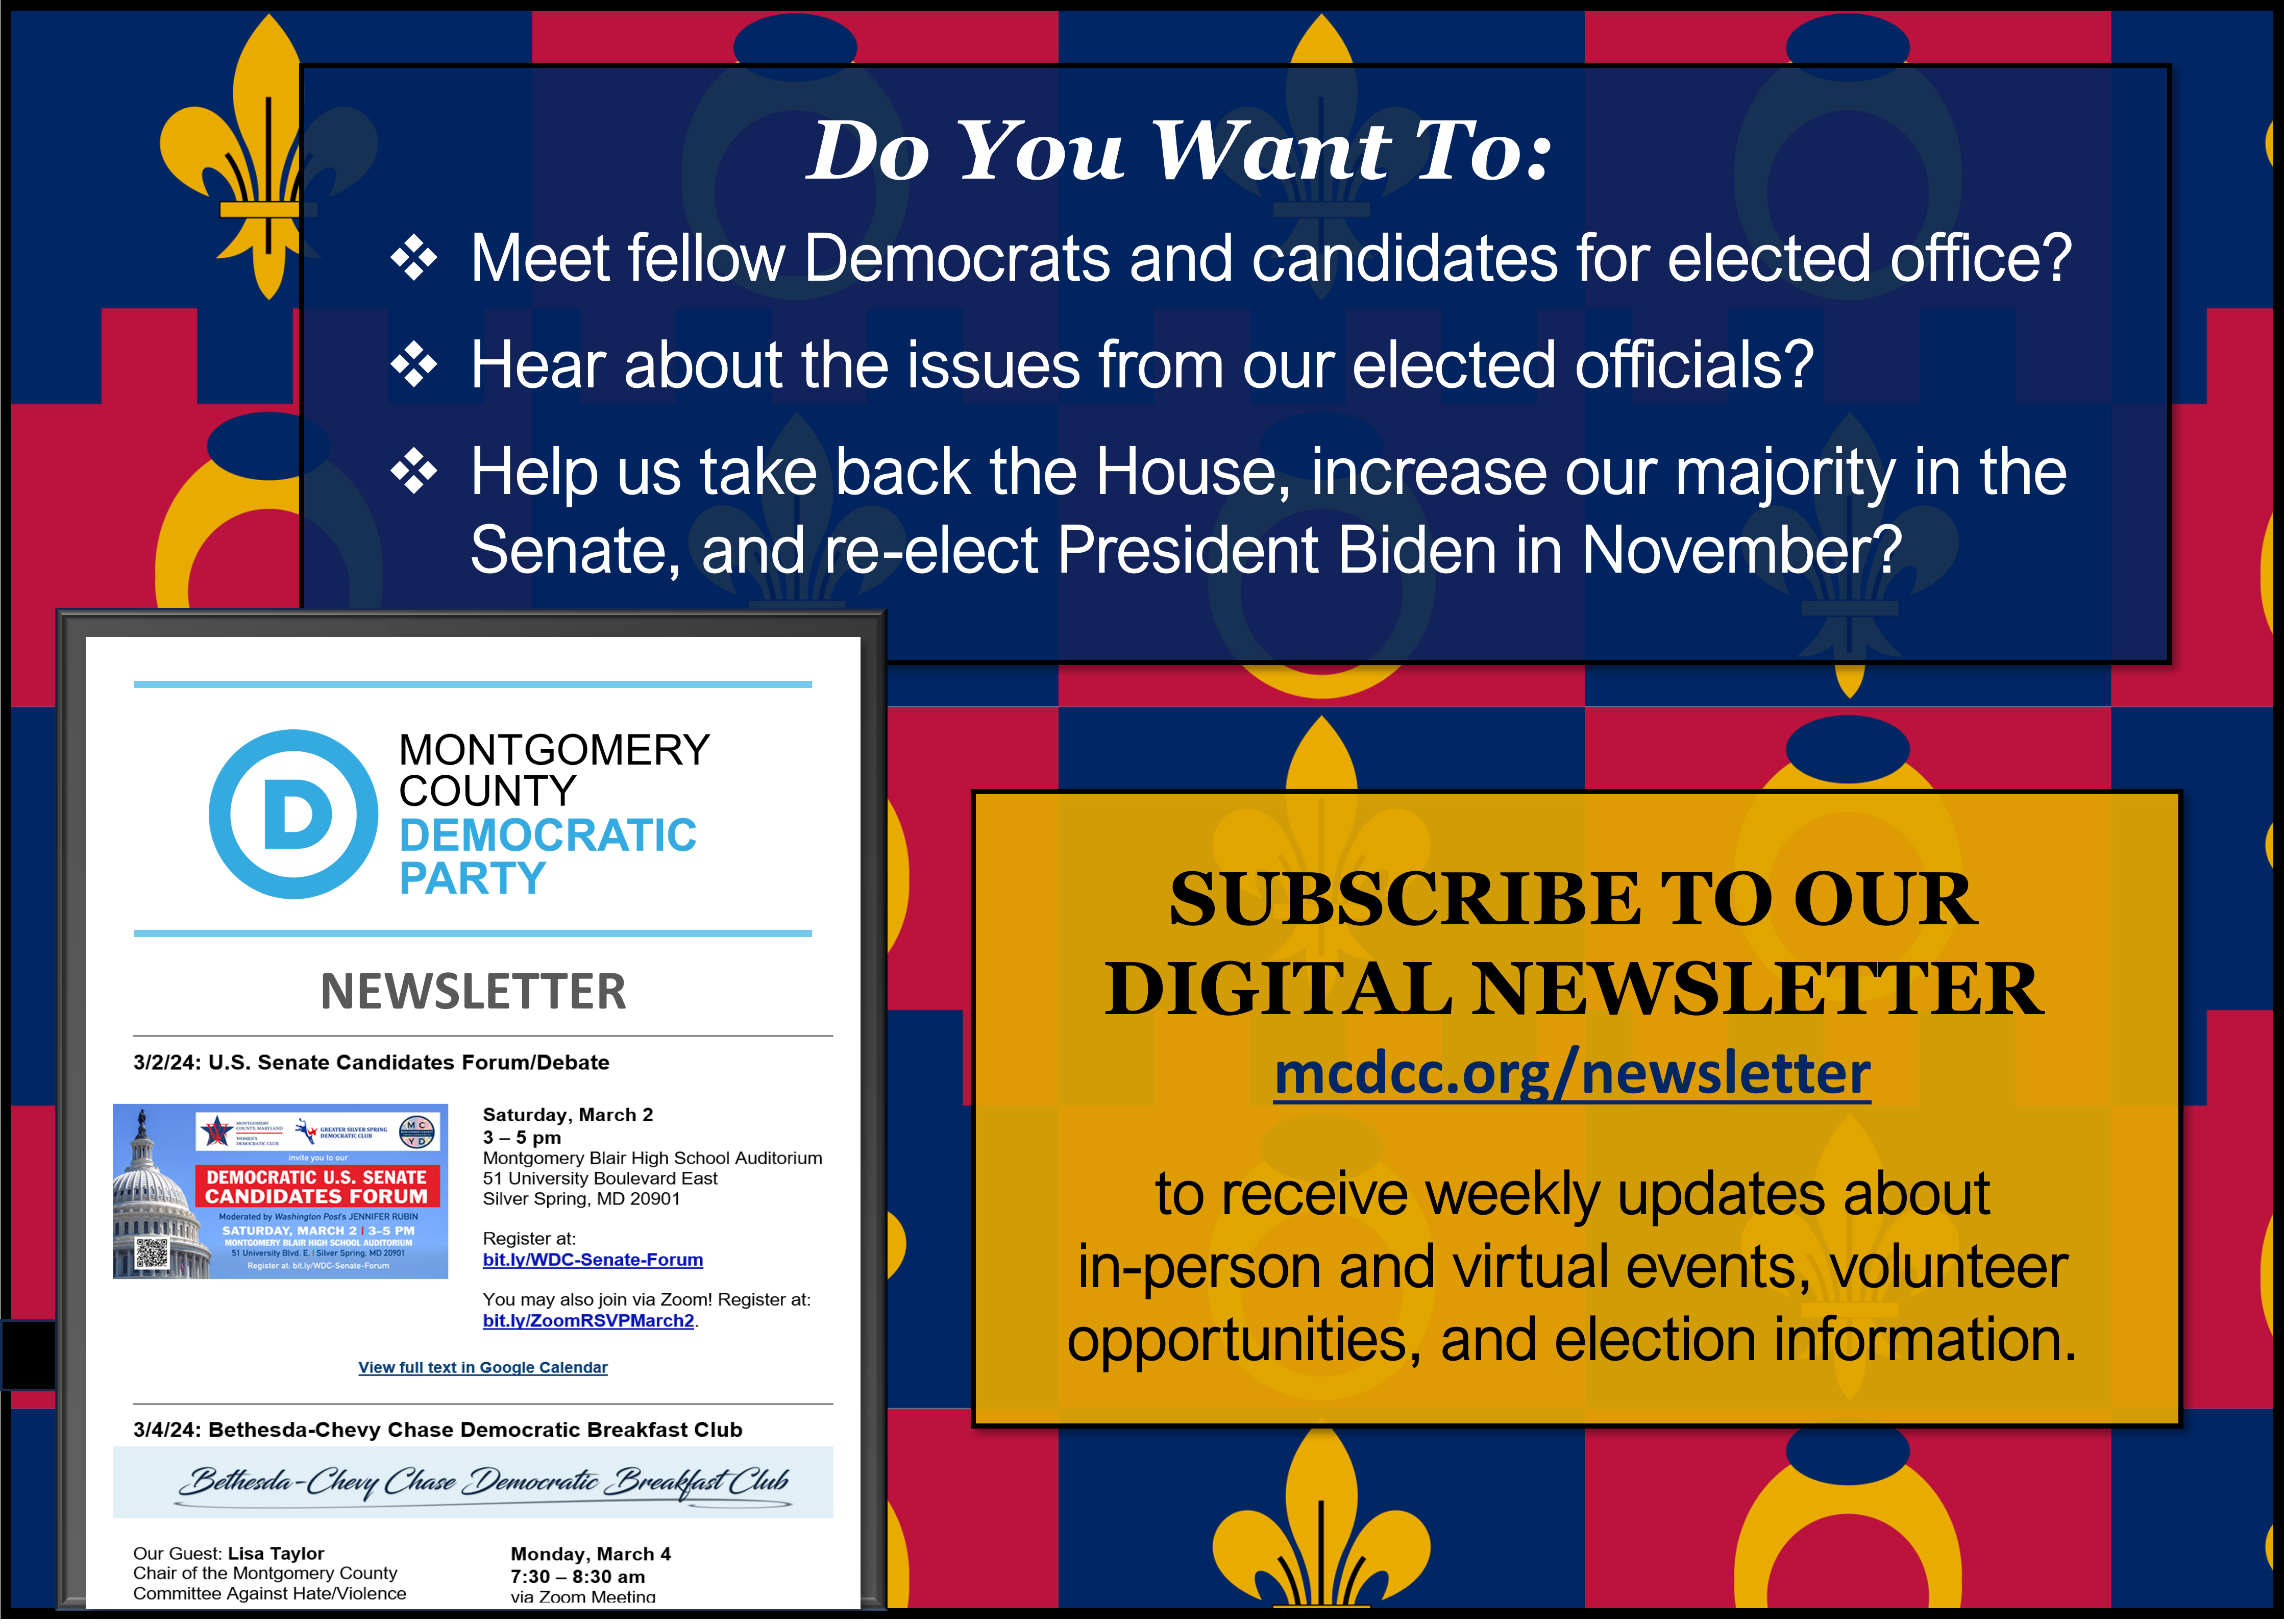 MCDCC newsletter graphic